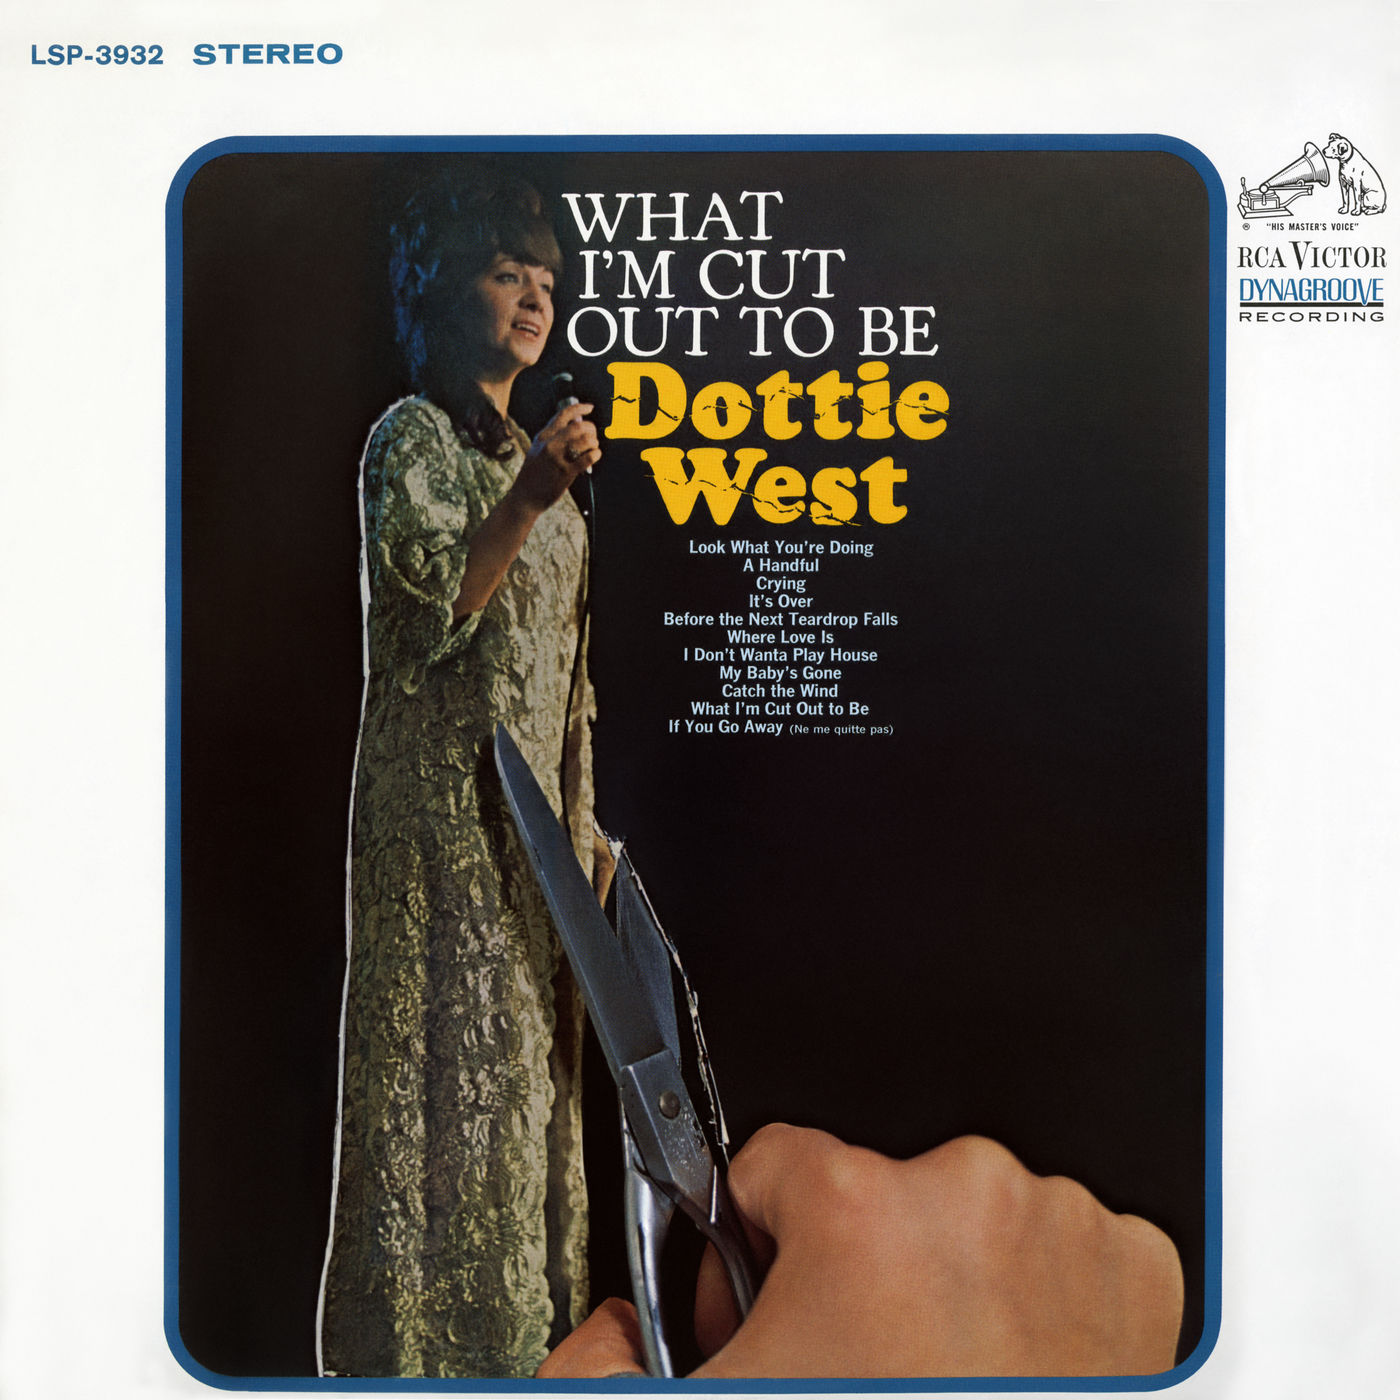 Dottie West – What I’m Cut Out to Be